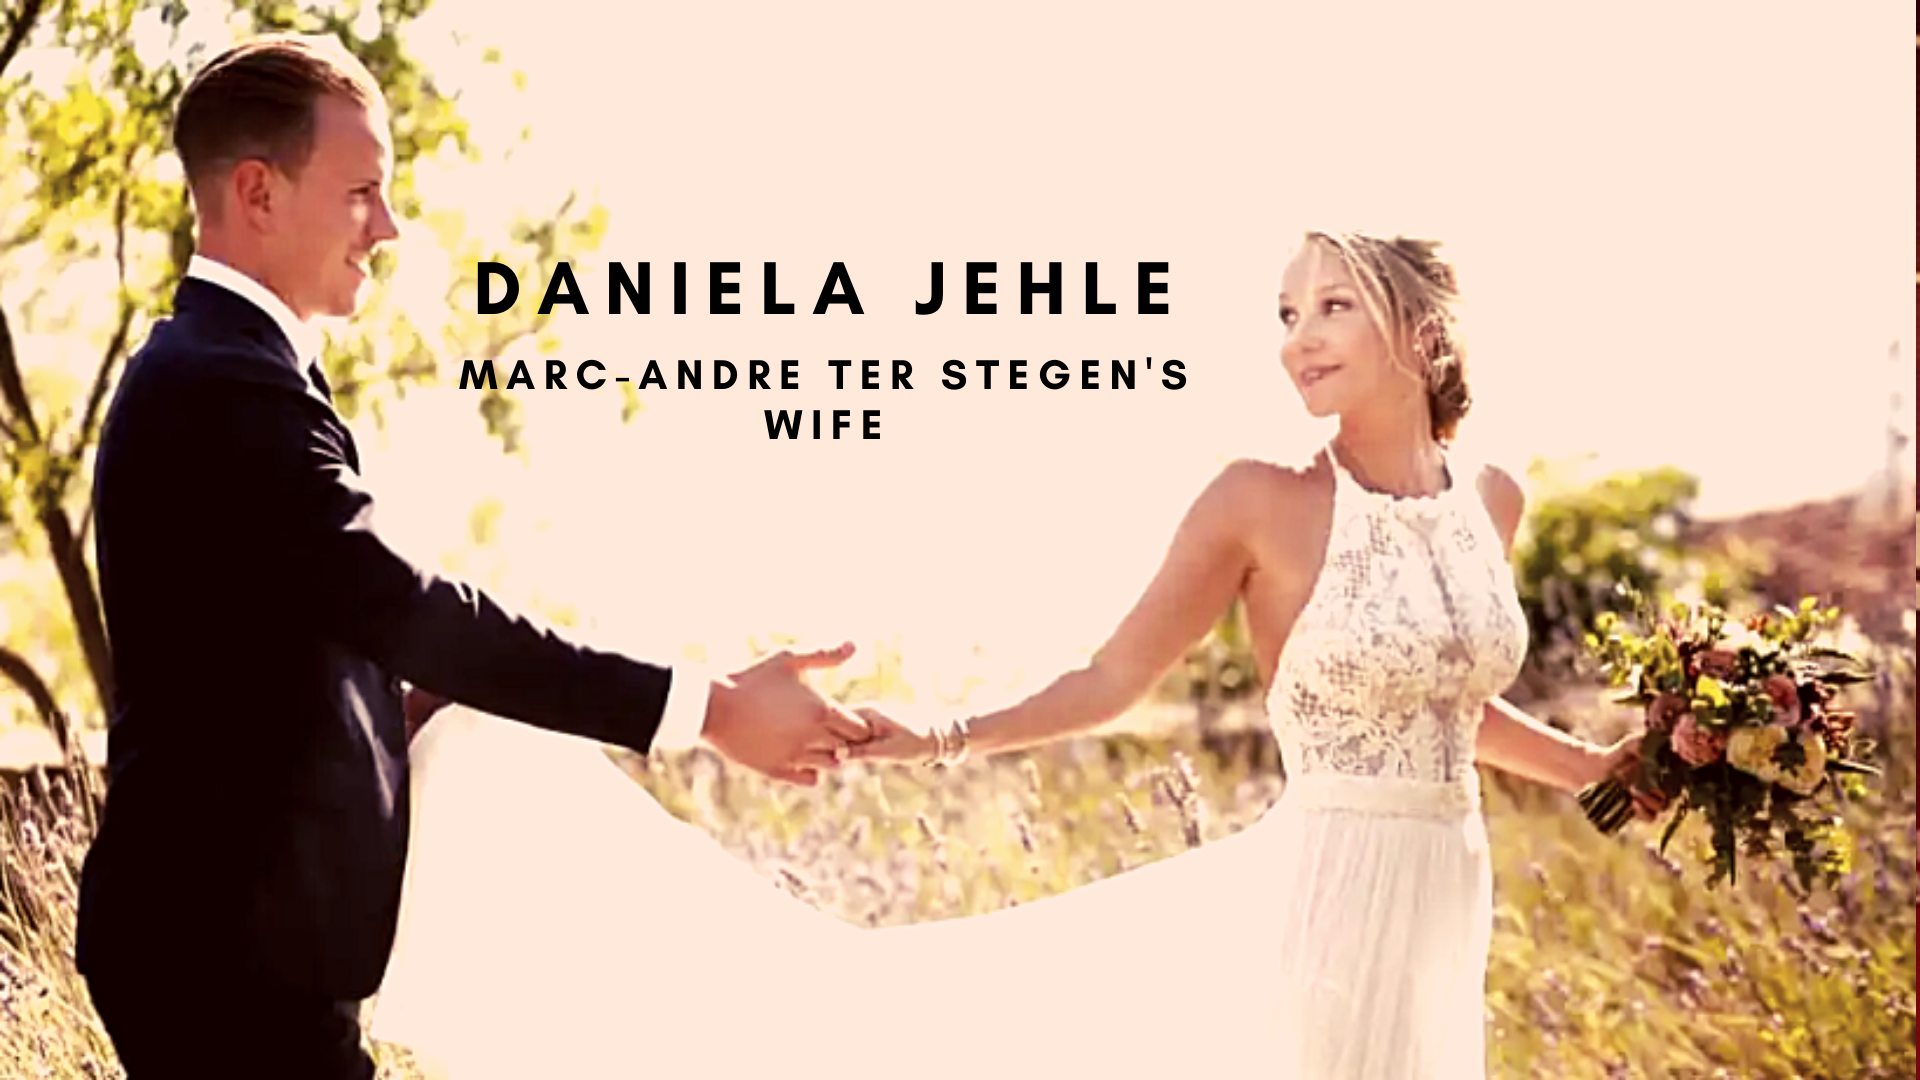 Daniela Jehle, the wife of Marc-Andre Ter Stegen. (Original Image as found on OhMyFootball)